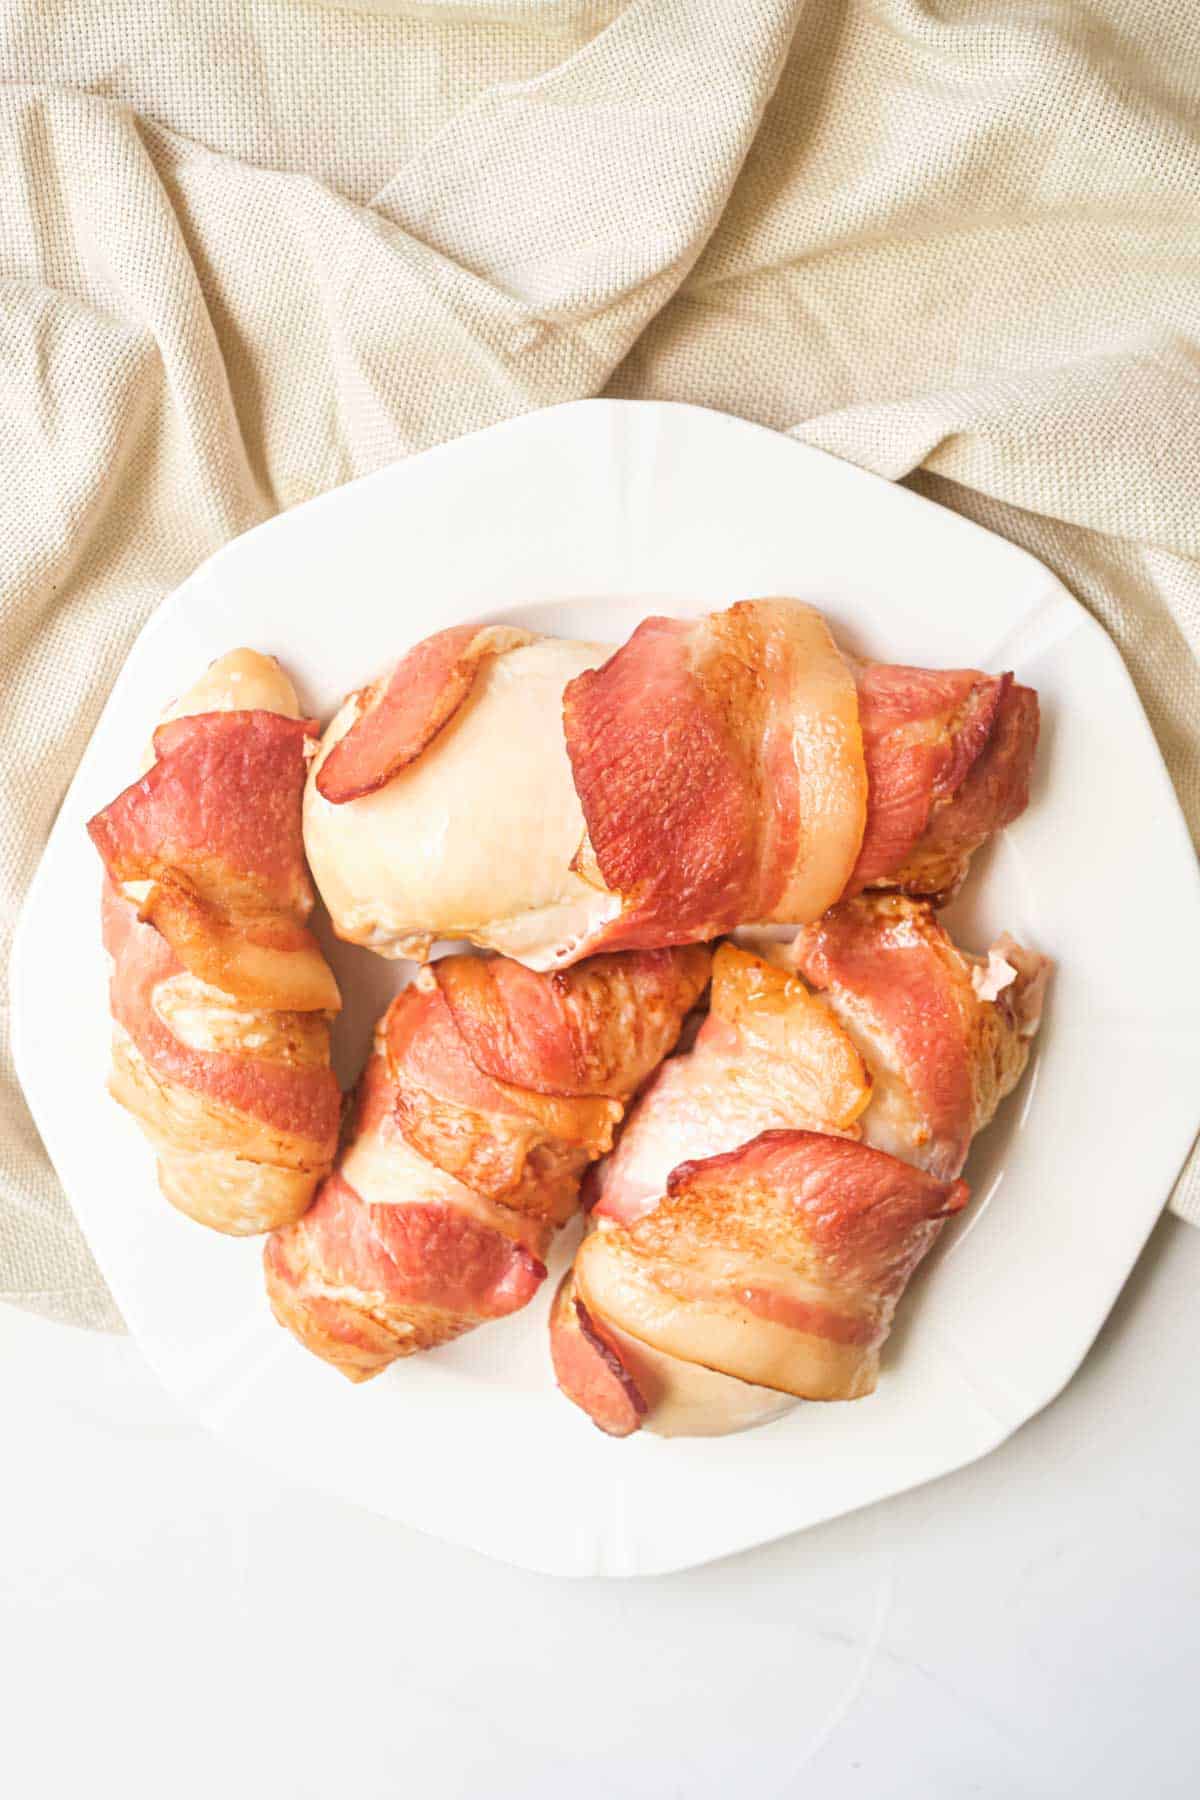 top down view of the completed bacon wrapped chicken breast recipe